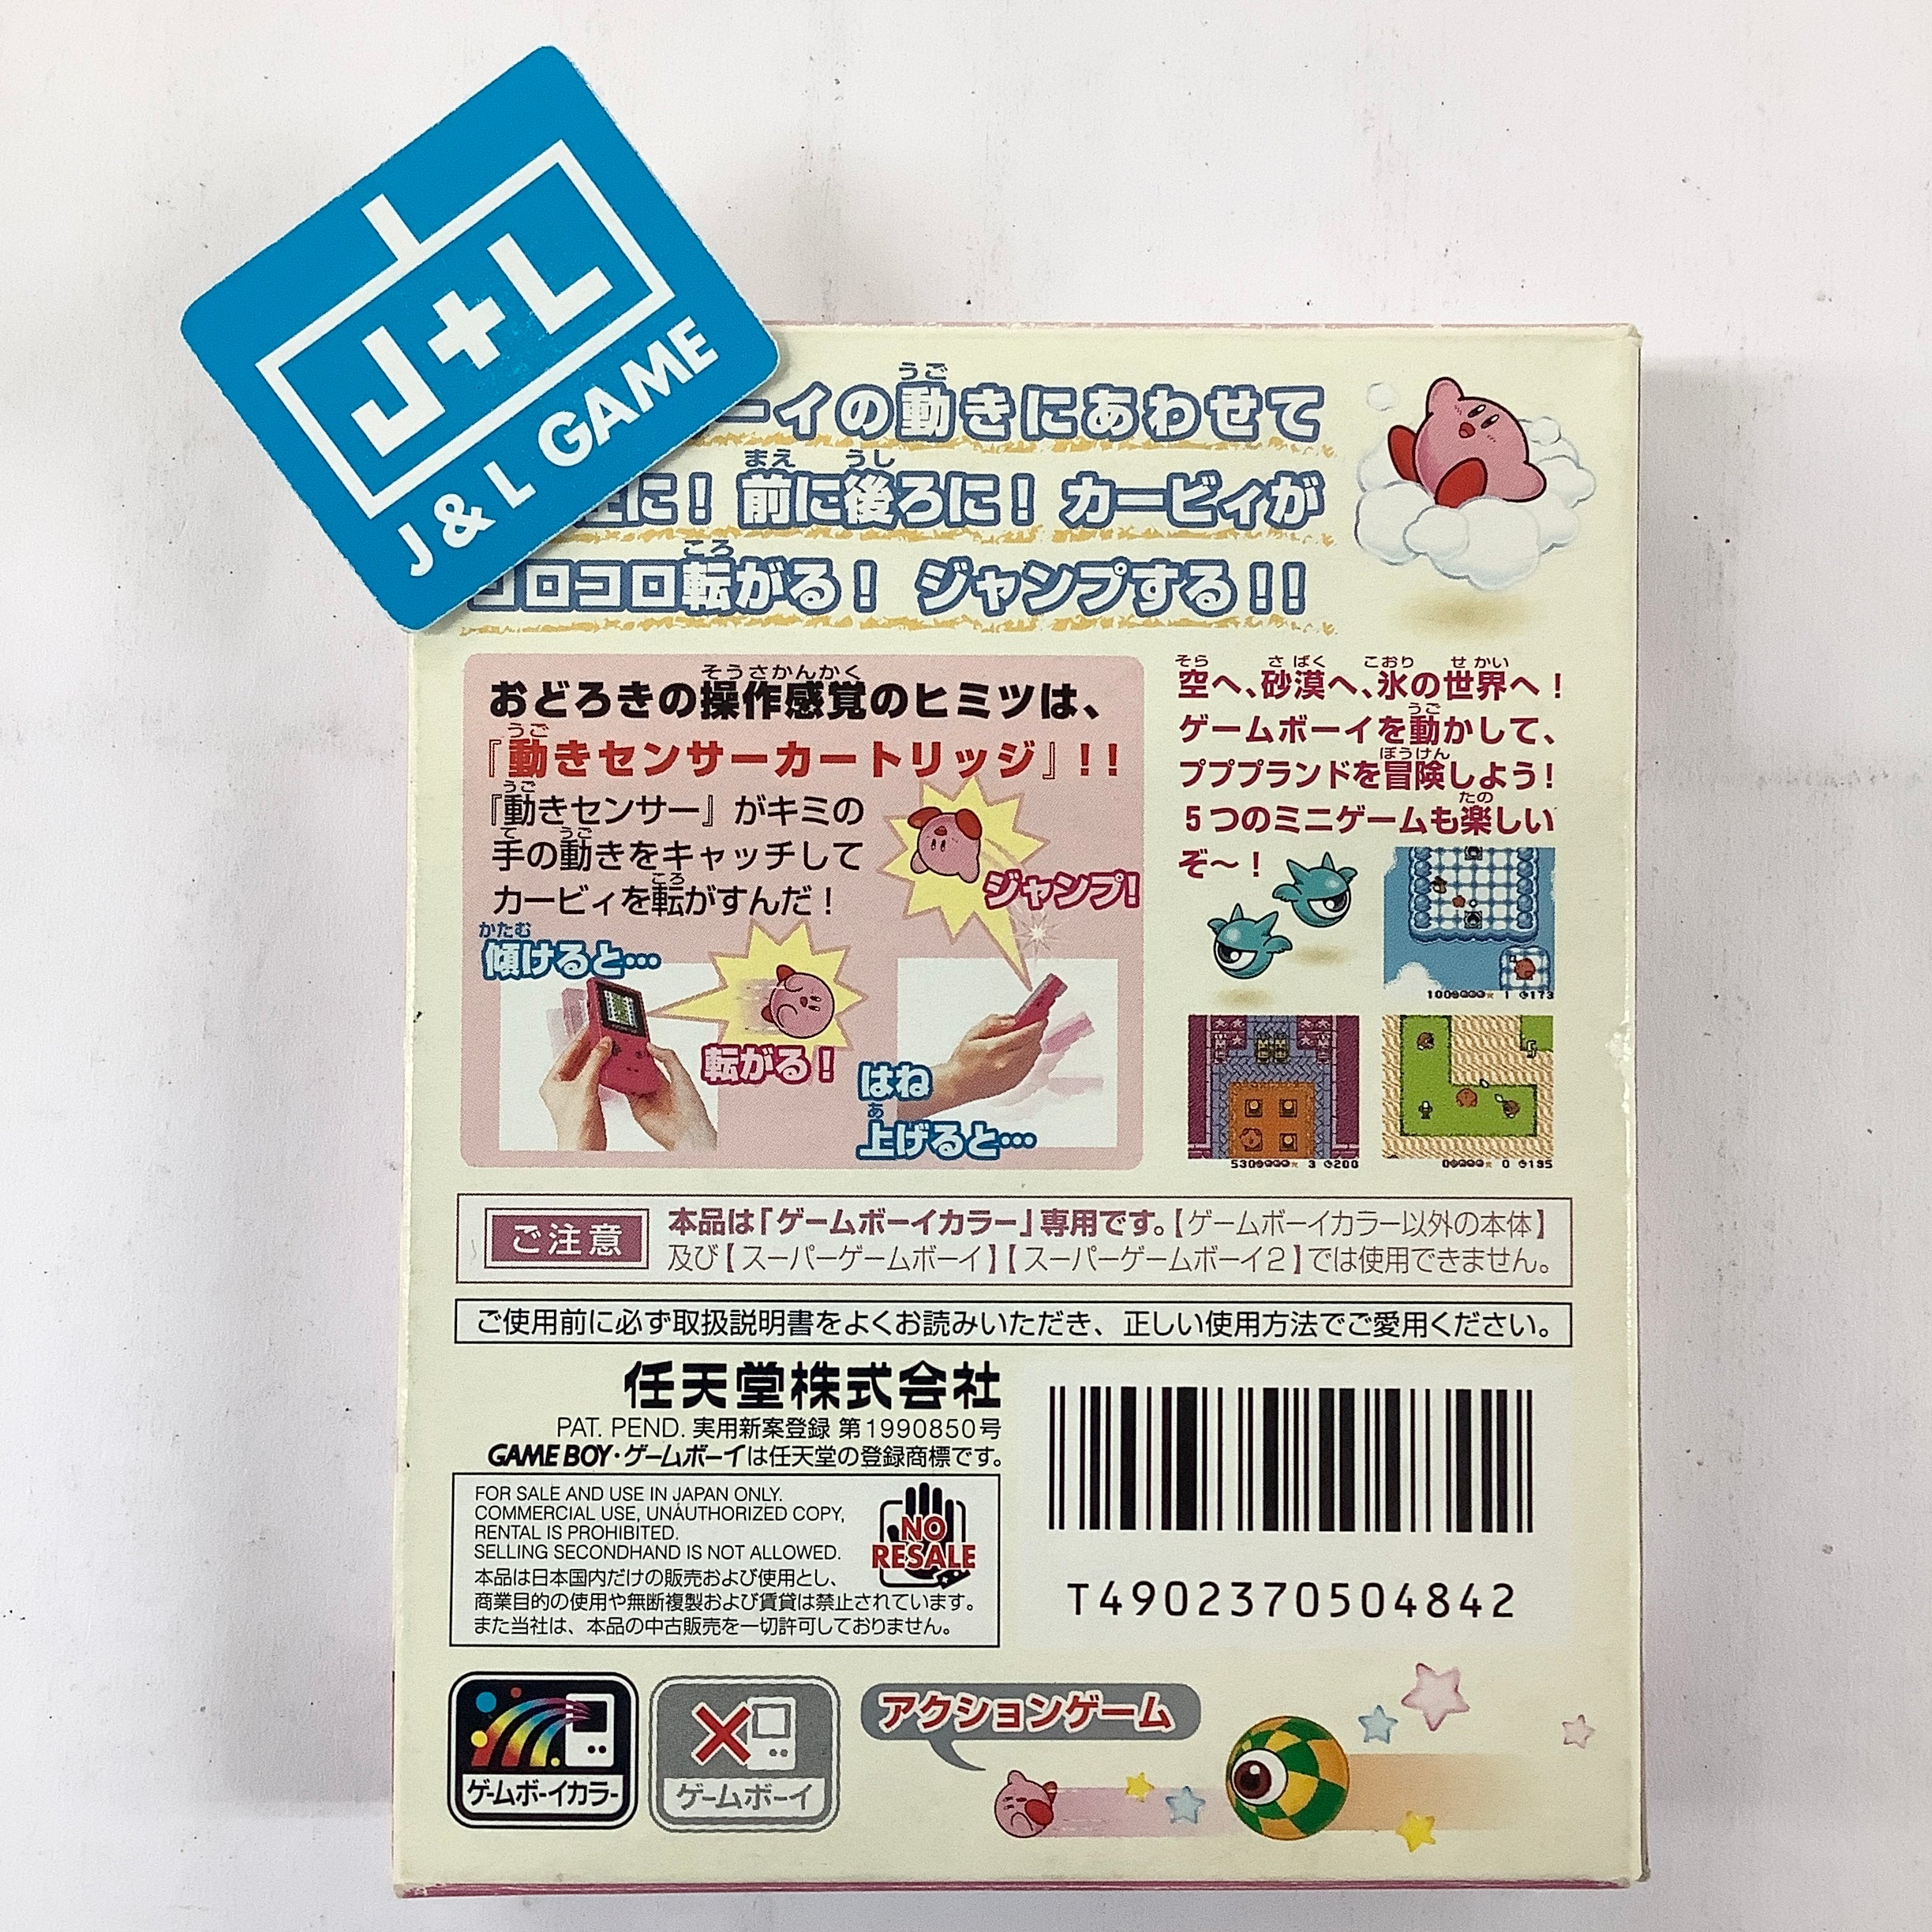 Koro Koro Kirby - (GBC) Game Boy Color [Pre-Owned] (Japanese Import) Video Games Nintendo   